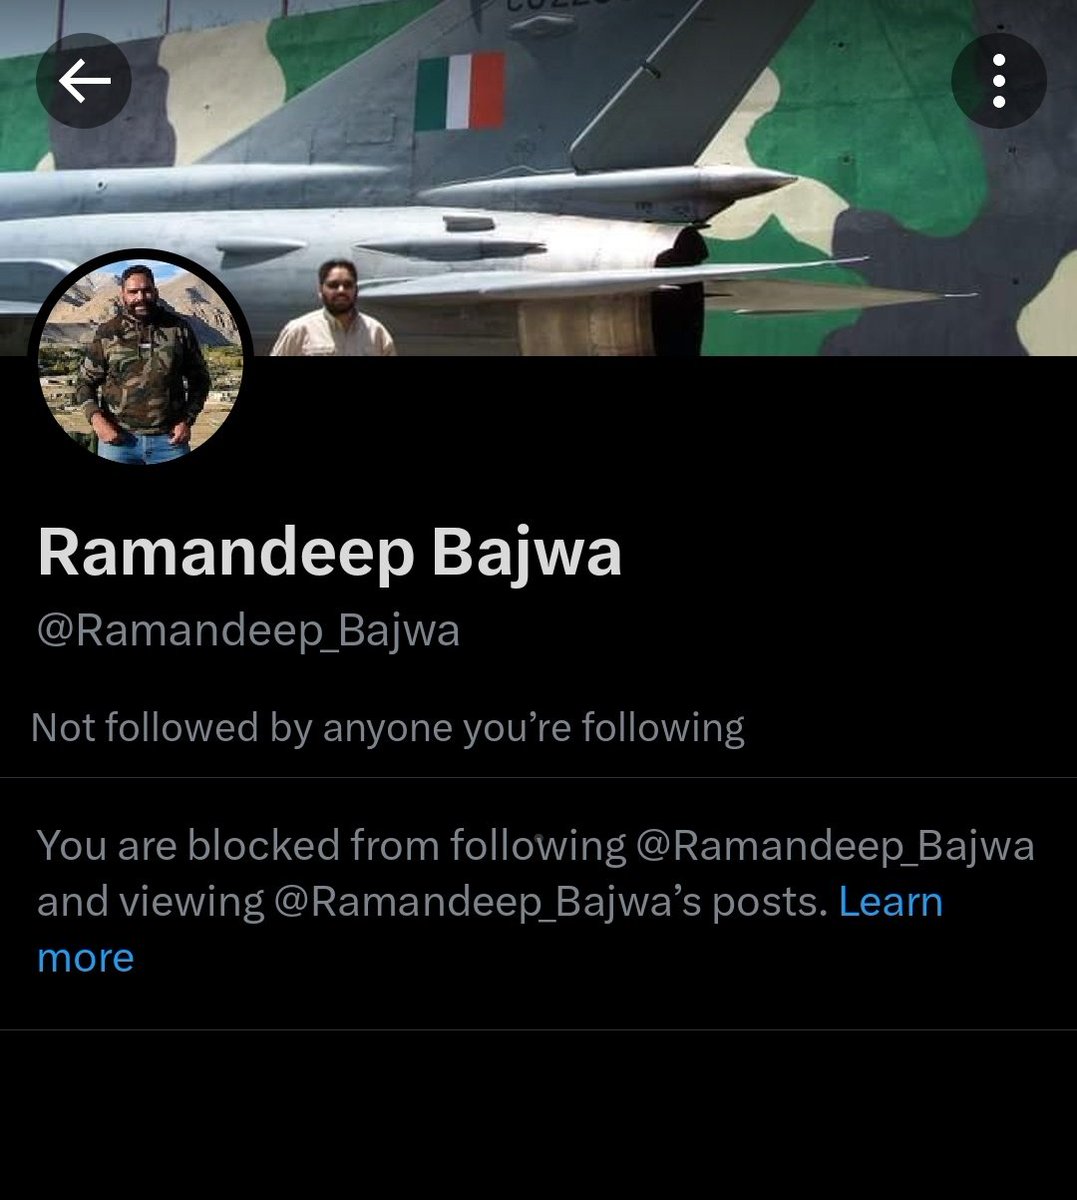 So @Ramandeep_Bajwa - A pot bellied journalist body shamed our Jawans. When shown the mirror, bhaag liya darpok. Guys, you know what to do.. 😊 Let's give this superficial journalist a meltdown he deserves until he apologises to the Indian Army.